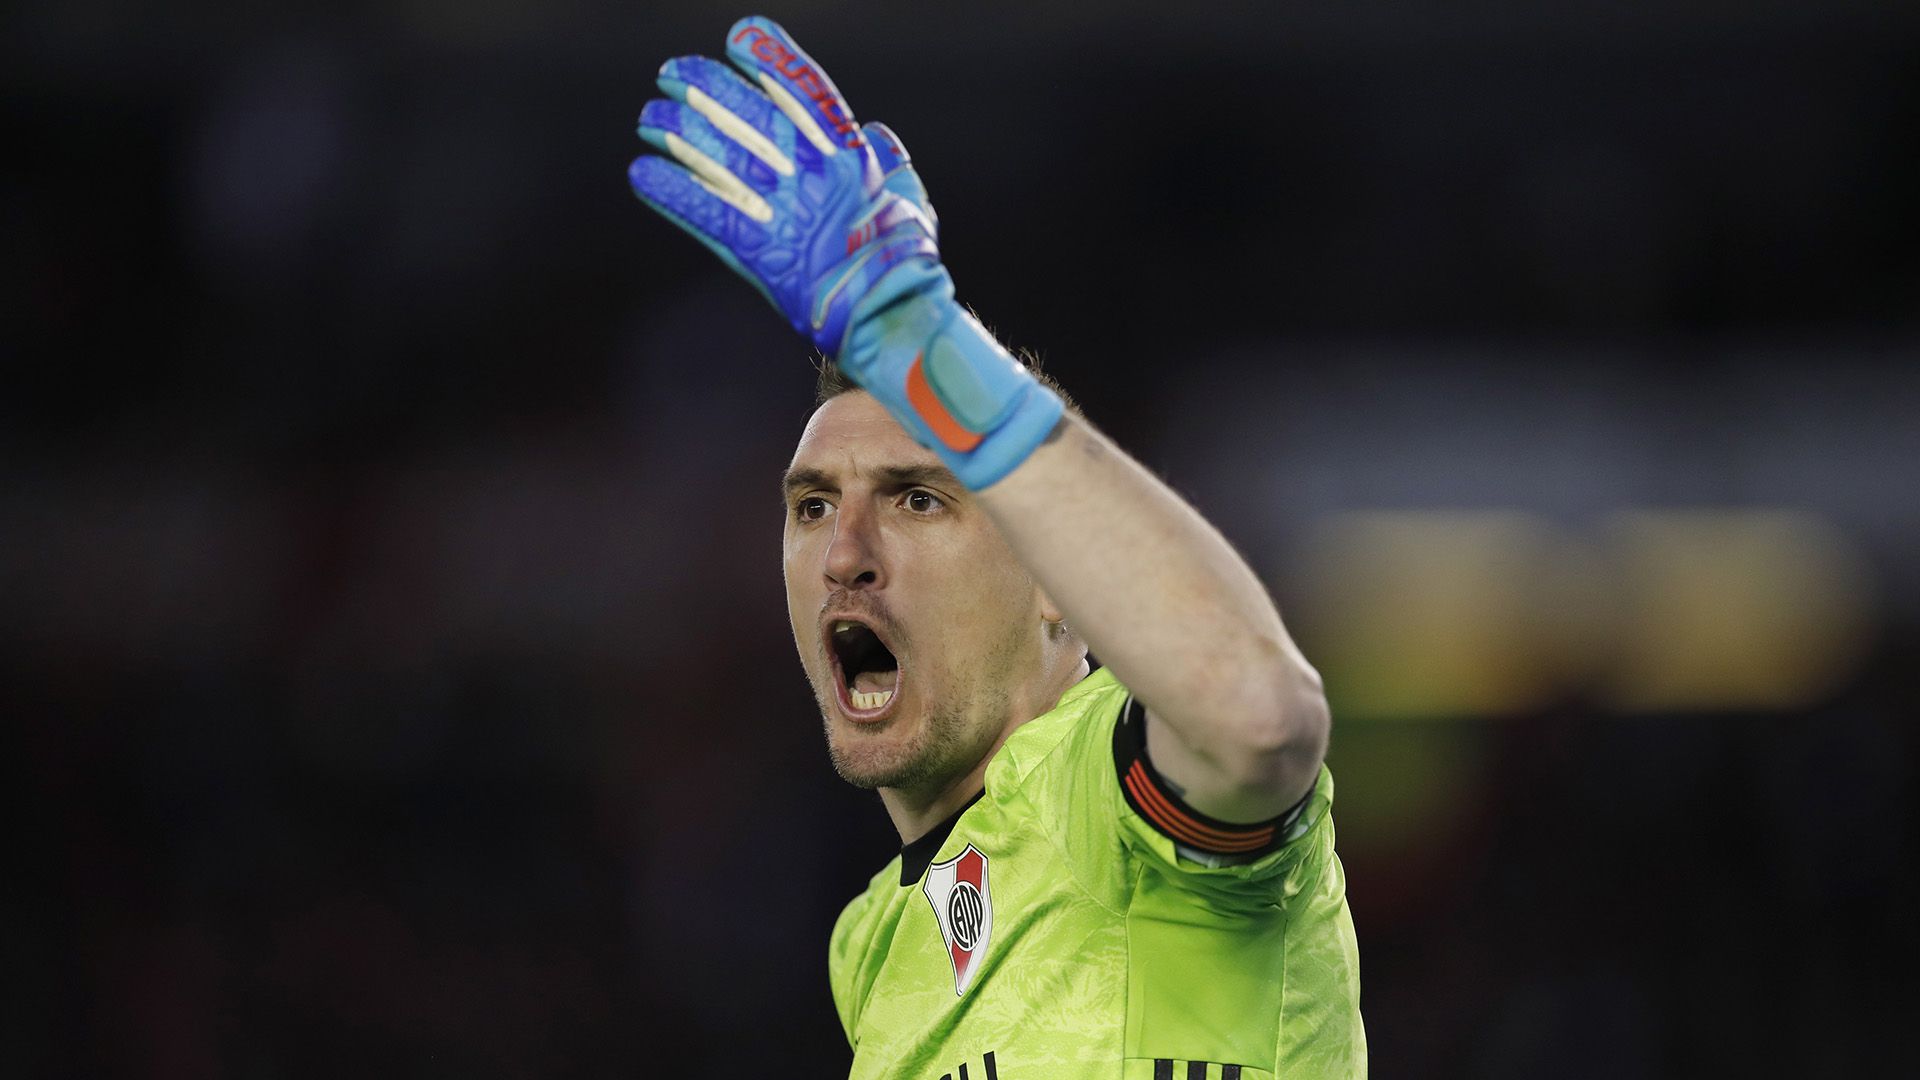 River Plate's goalkeeper Franco Armani gestures during an Argentine first division soccer game against Boca Juniors in Buenos Aires, Argentina, Sunday, Sept. 1, 2019. (AP Photo/Natacha Pisarenko)